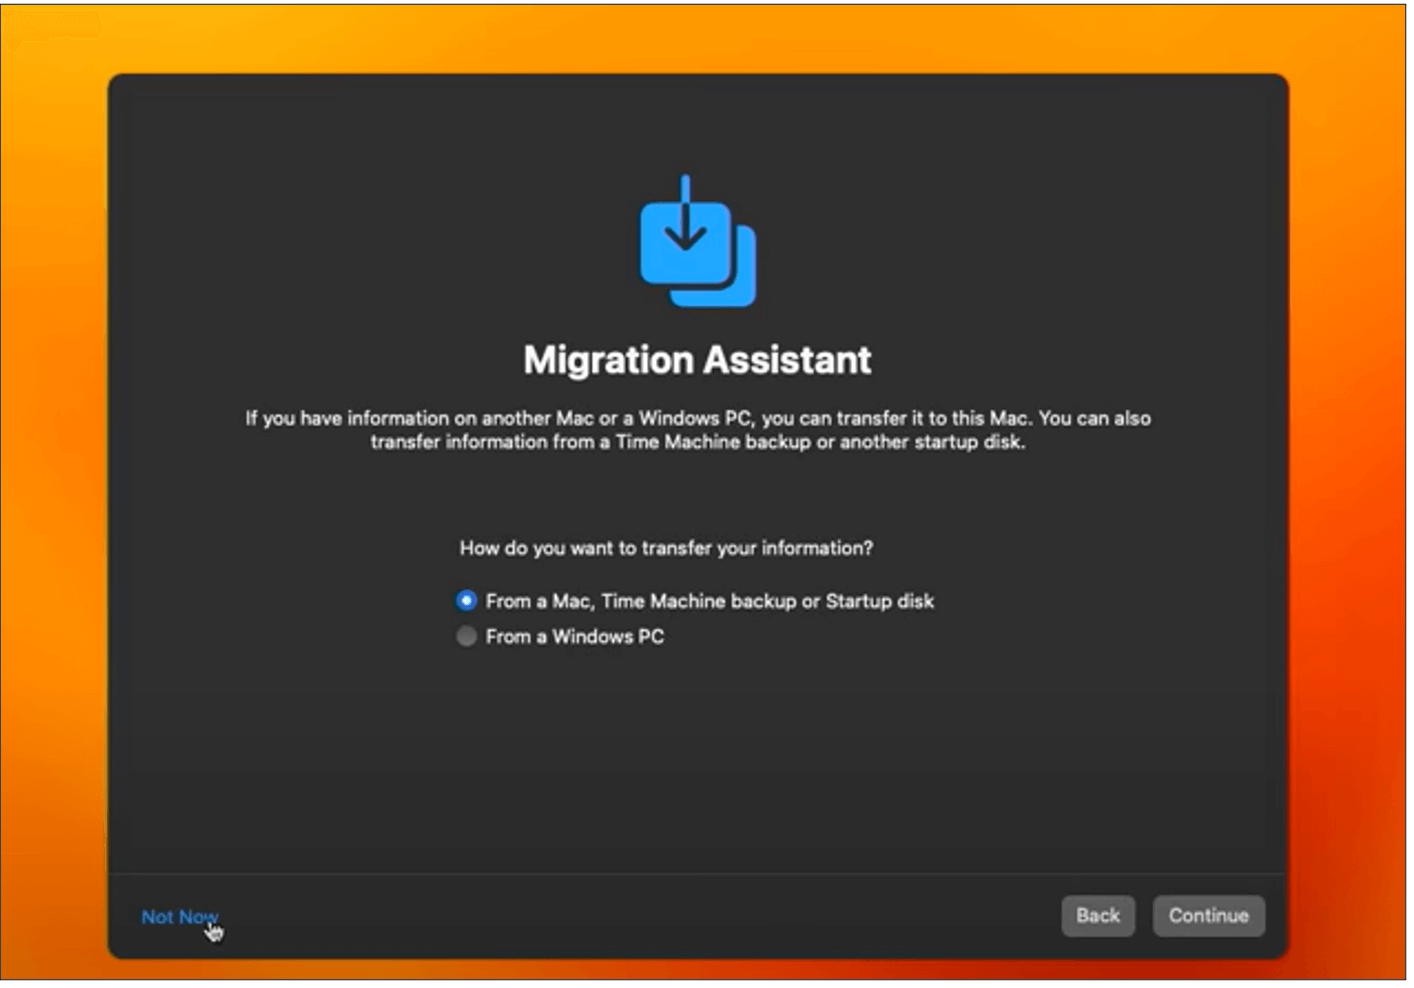 Migration assistant screen with Not Now highlighted in bottom left corner to skip this step for now.